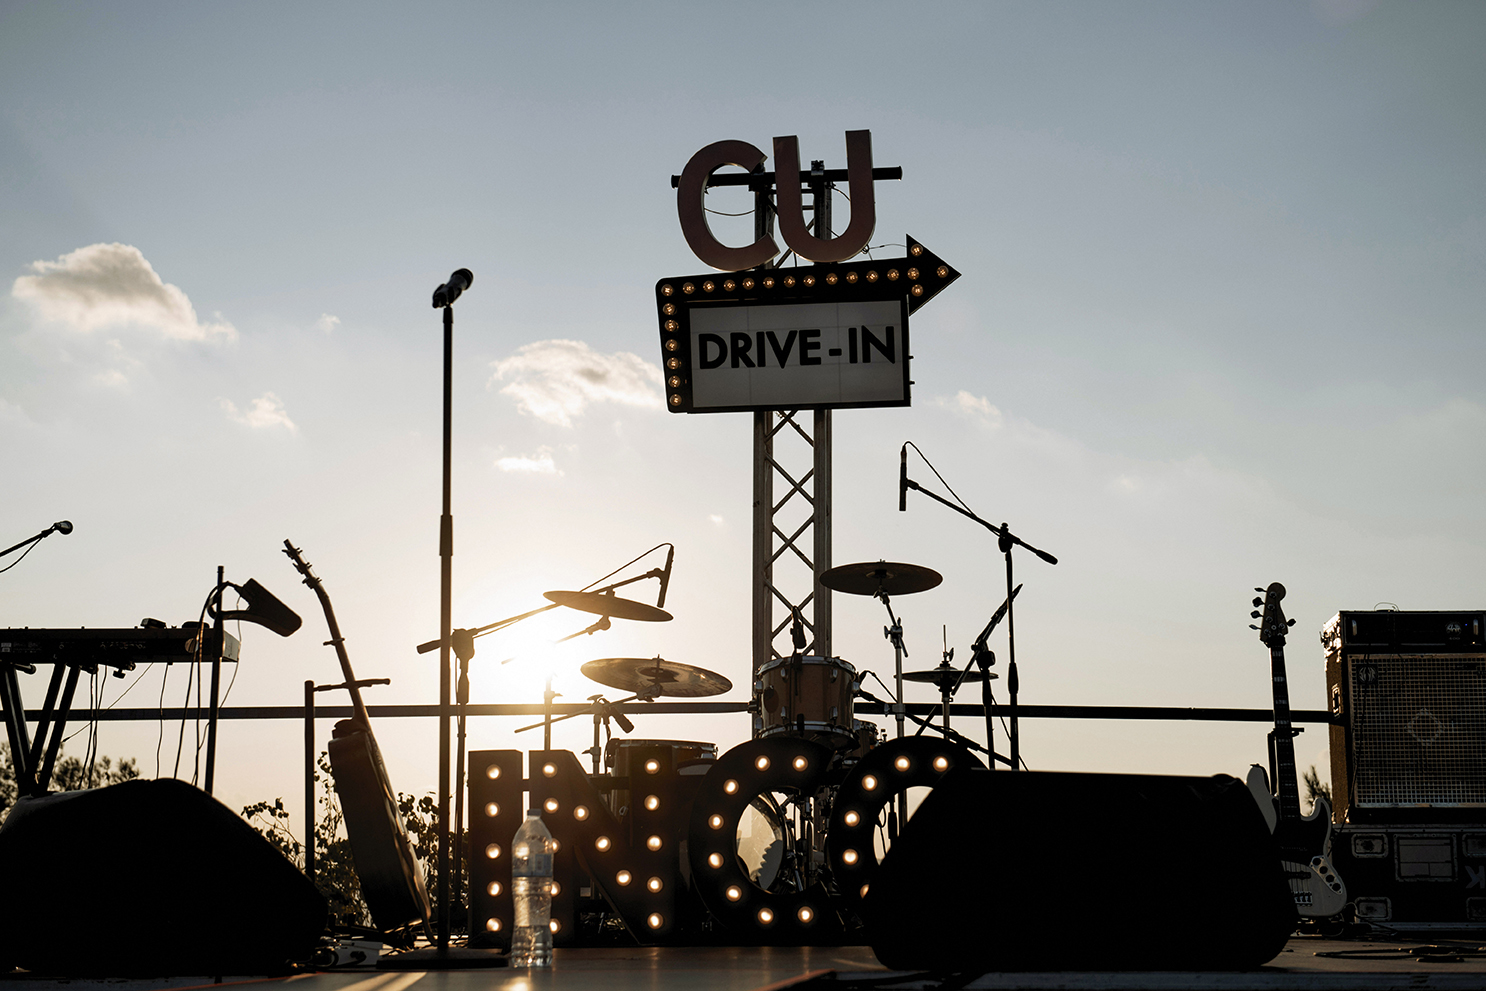 Drive-in Concert